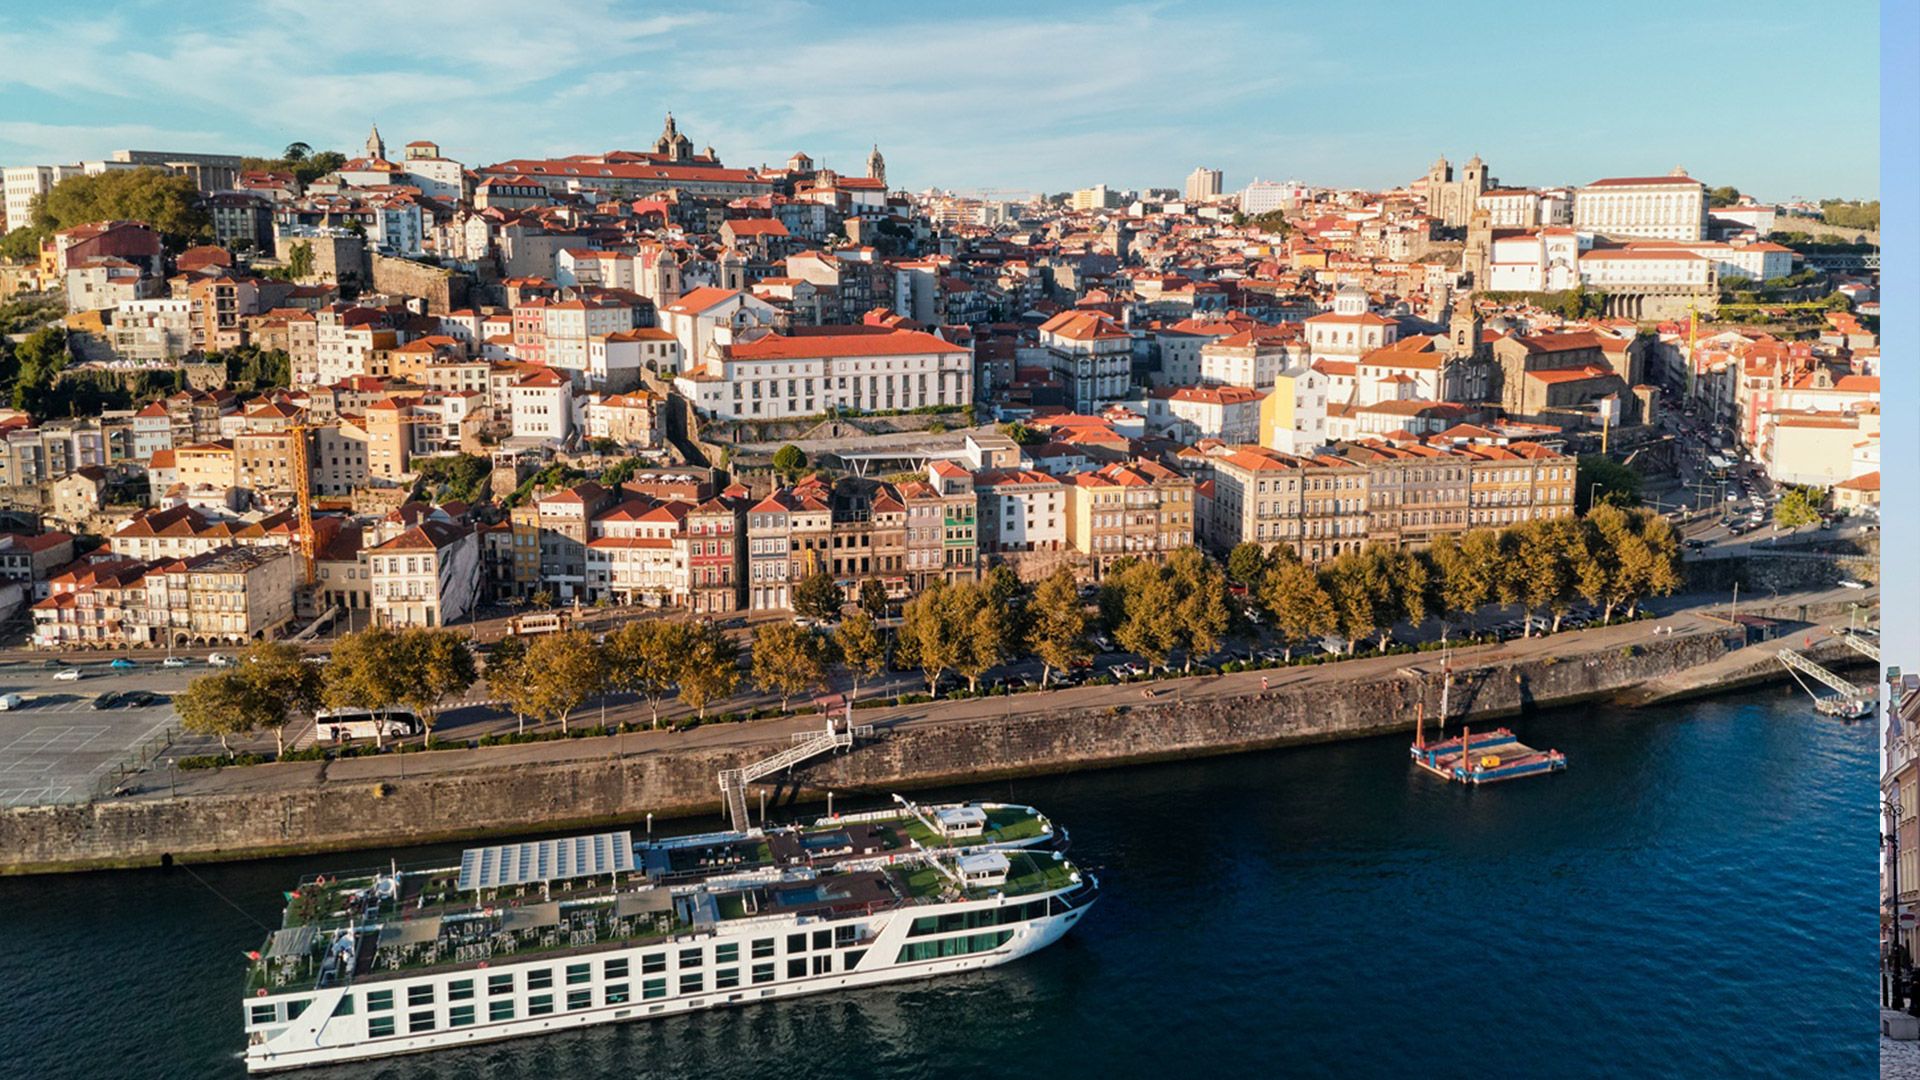 With PayPorter, you can make fast, easy and safe money transfers to Portugal at the most affordable prices!